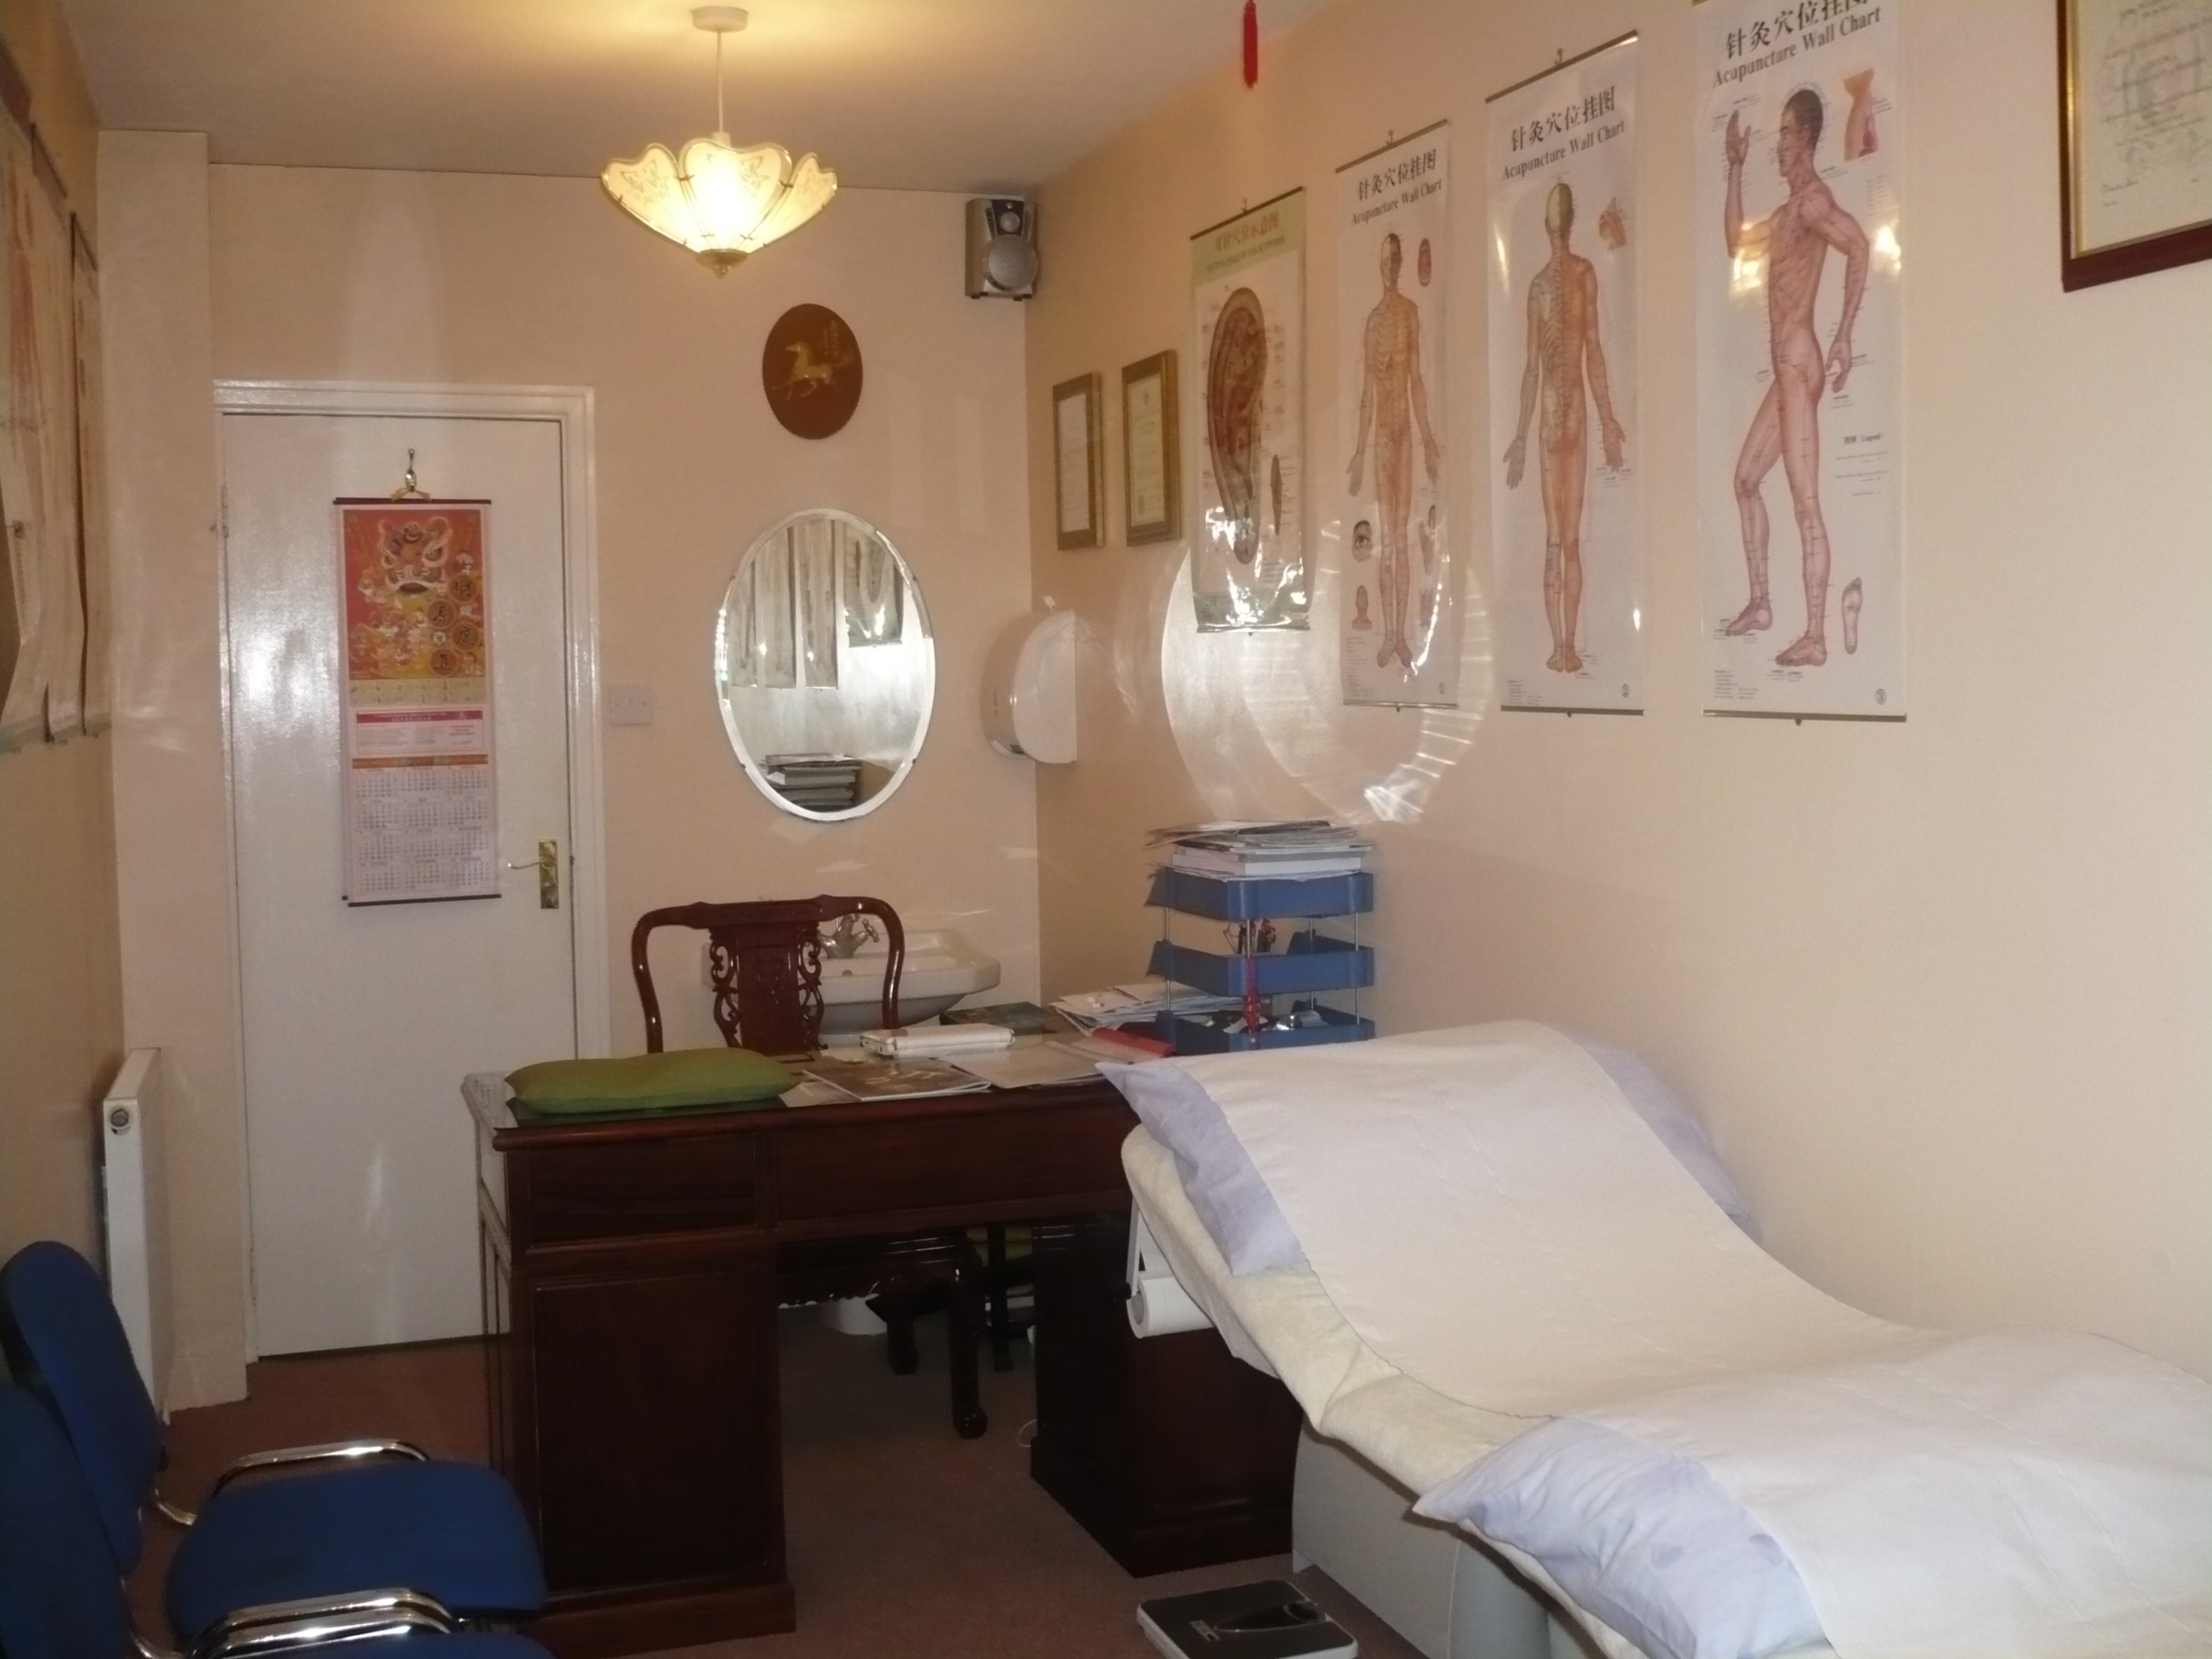 Dr Cheng's Clinic in Edgware, London